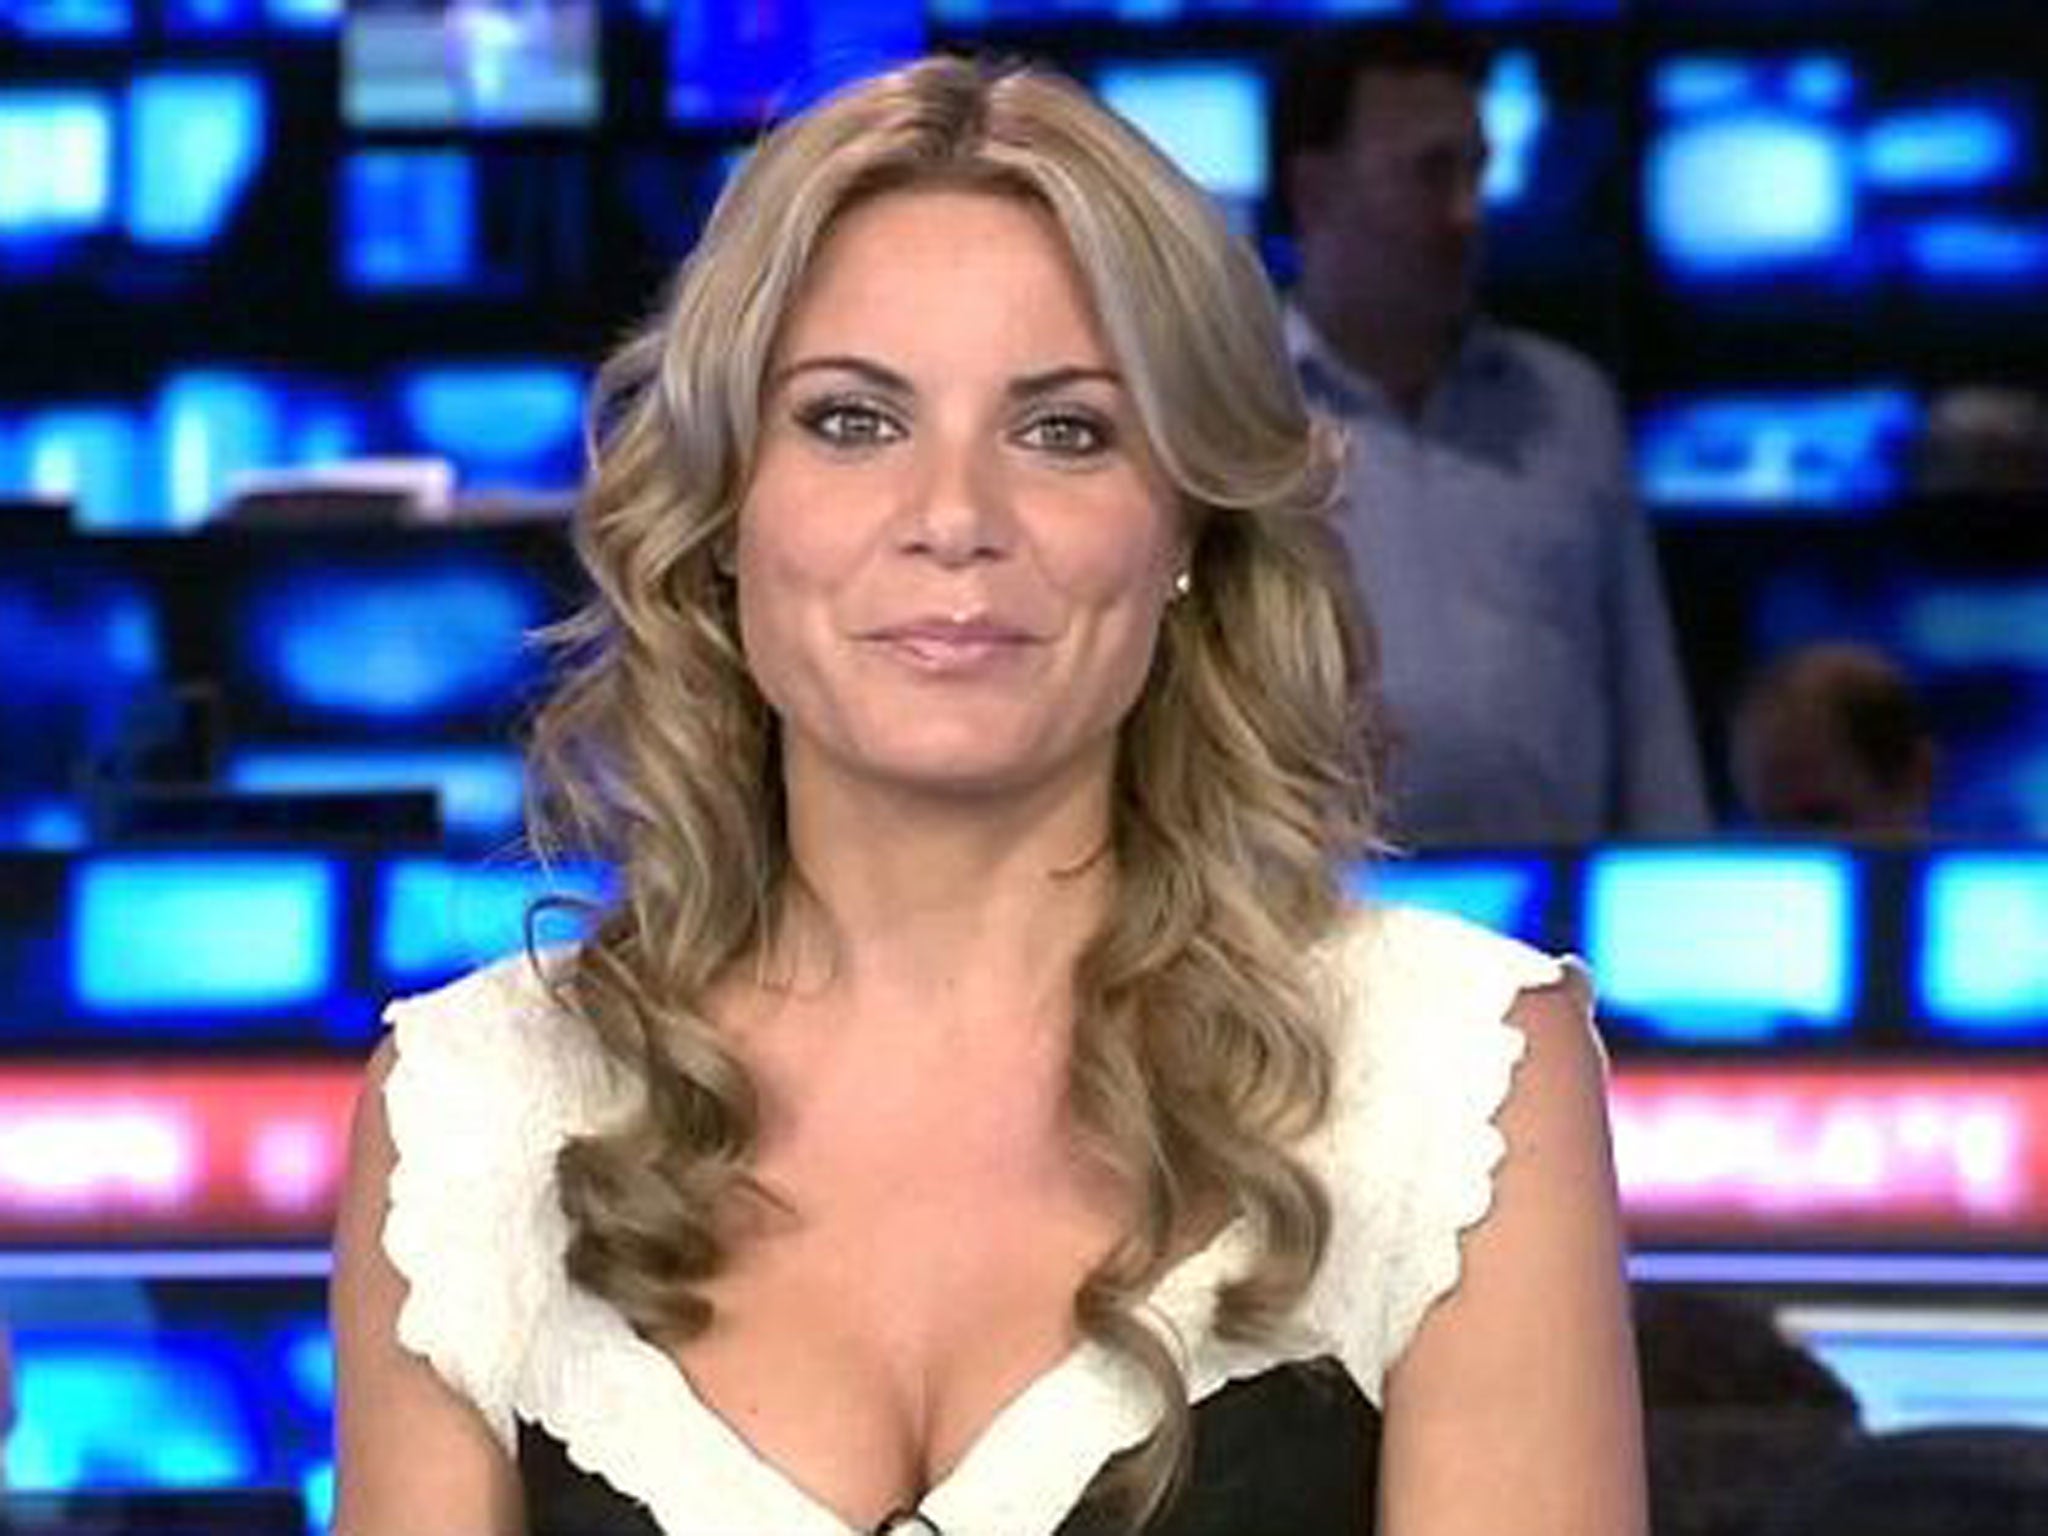 Sky Sports treats women presenters as 'window dressing' says Gabby Logan, The Independent